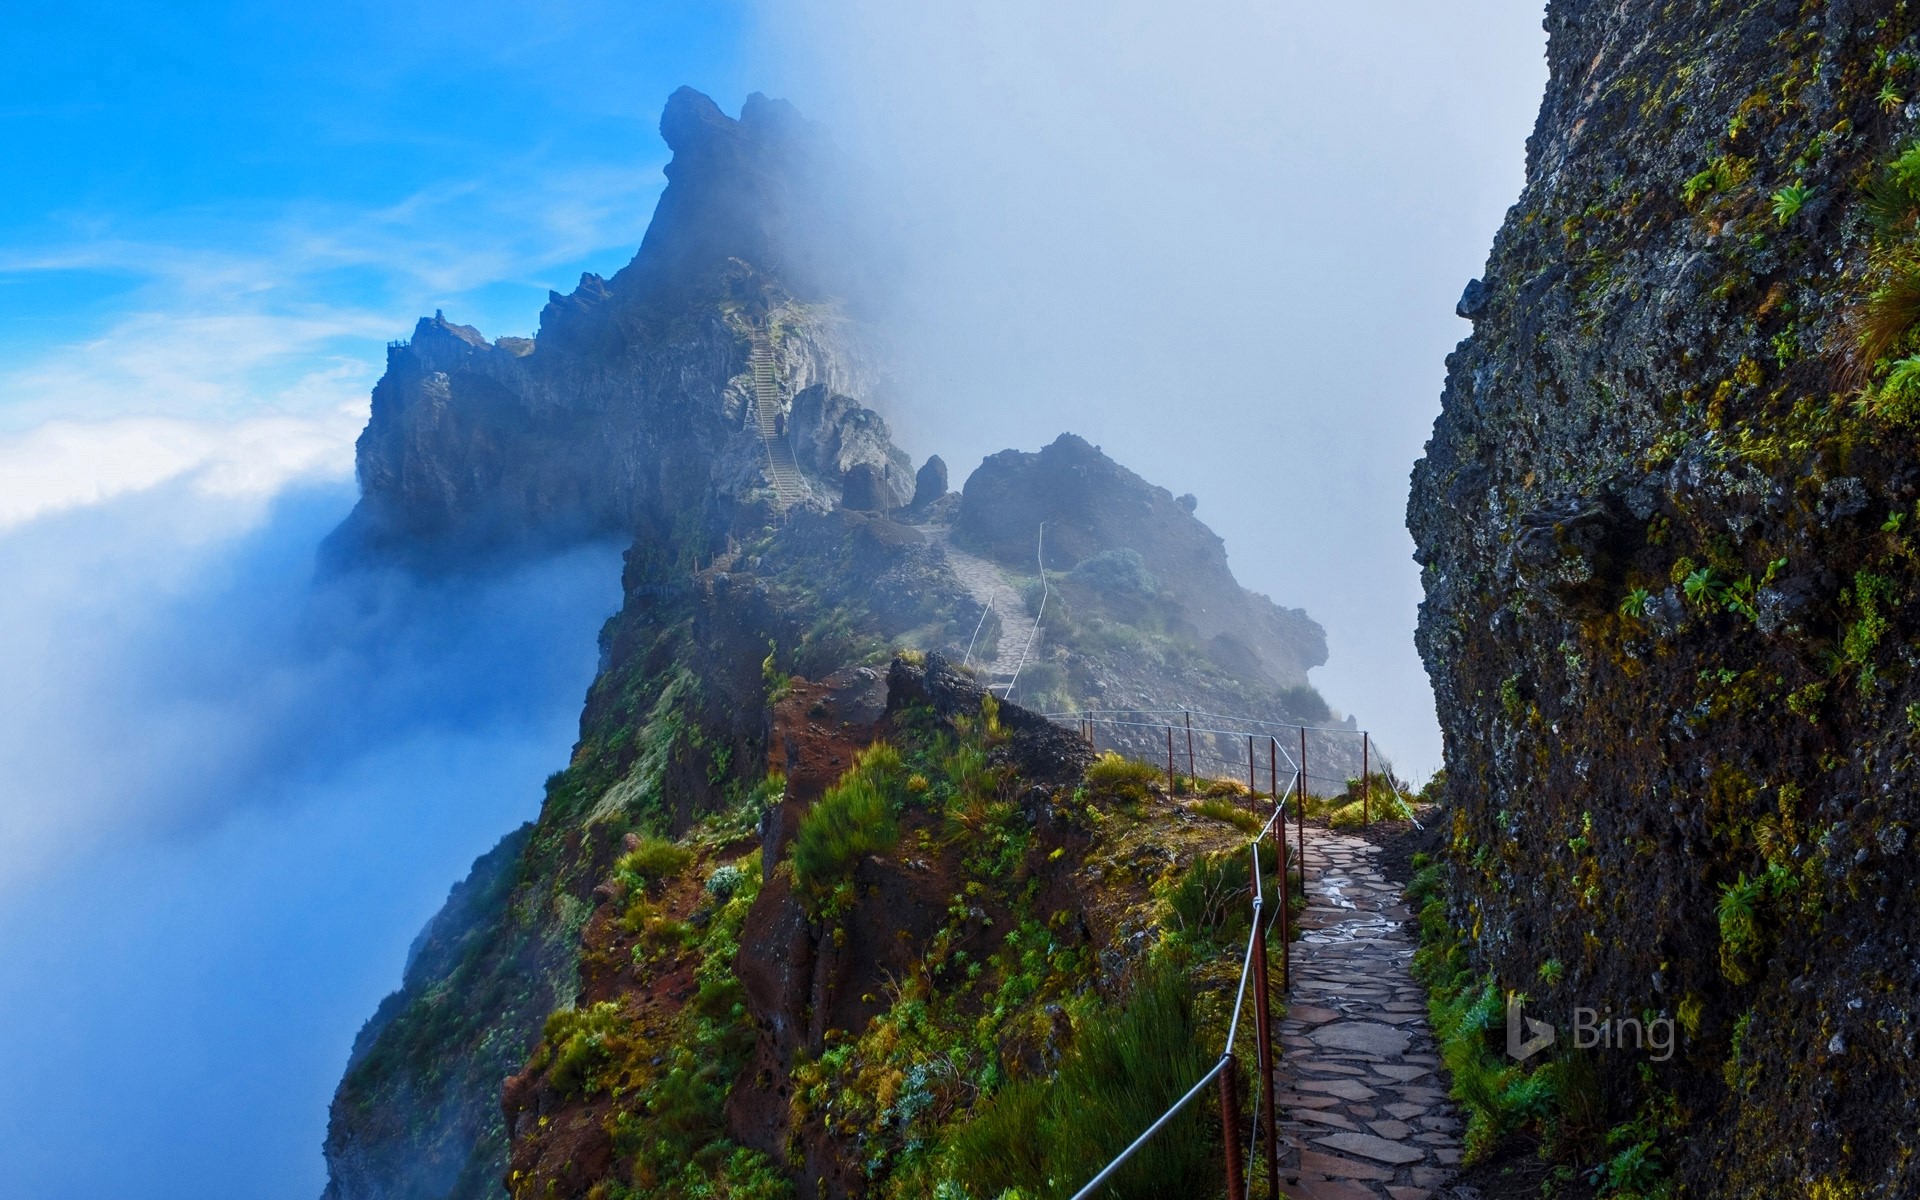 Mountain trail in Madeira, Portugal